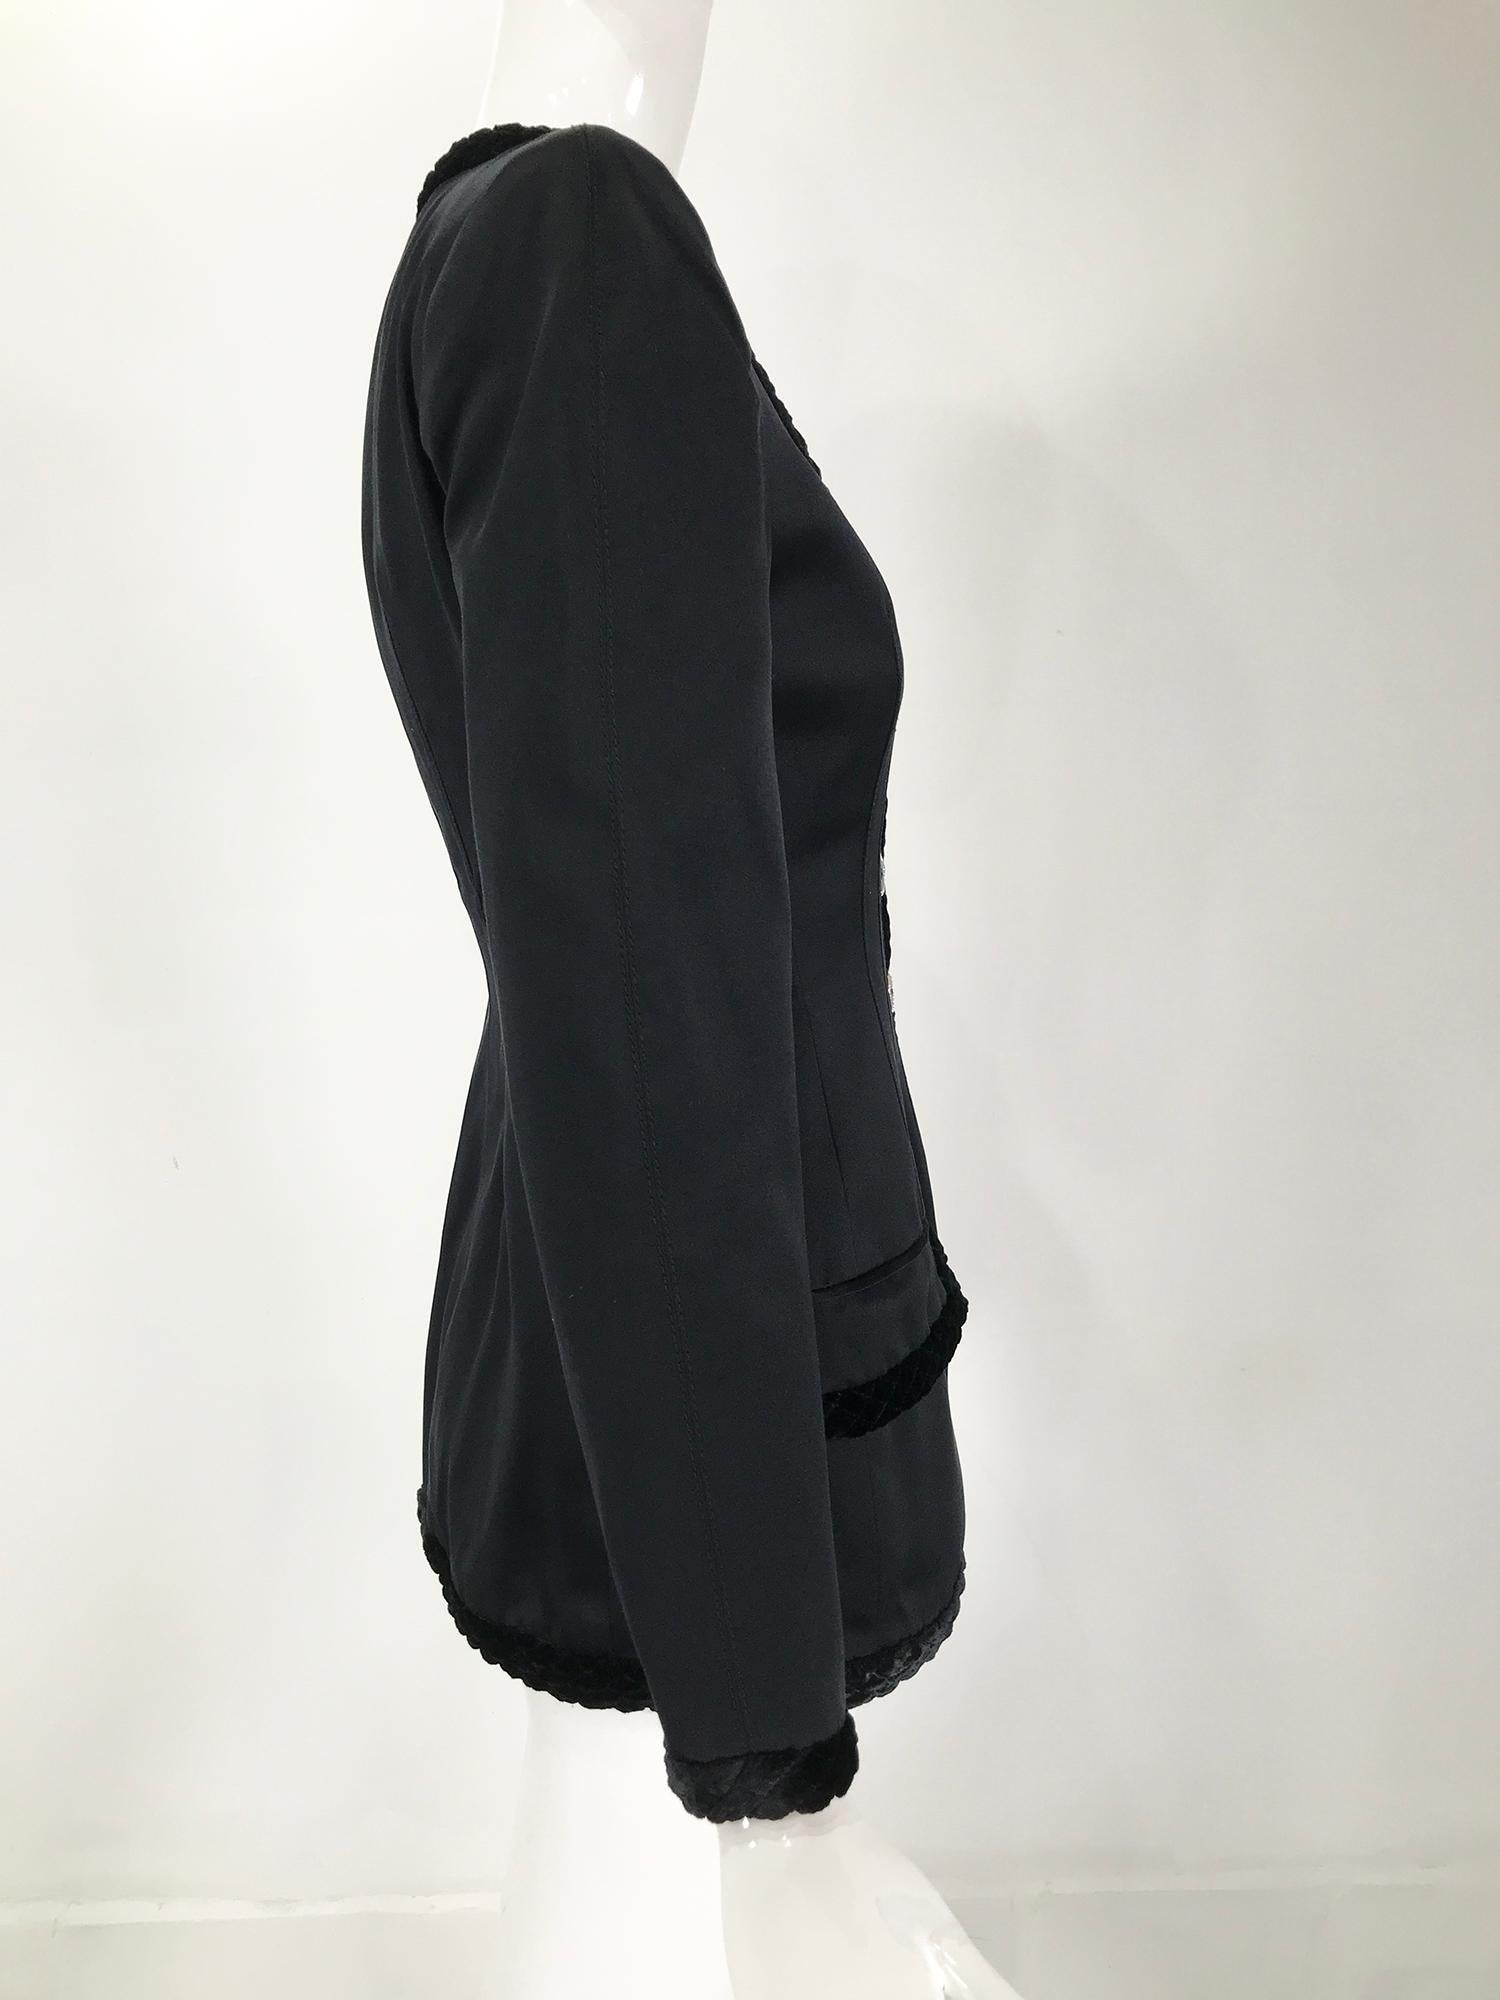 Valentino Black Silk Fitted Jewel Button Evening Jacket 1990s For Sale 5